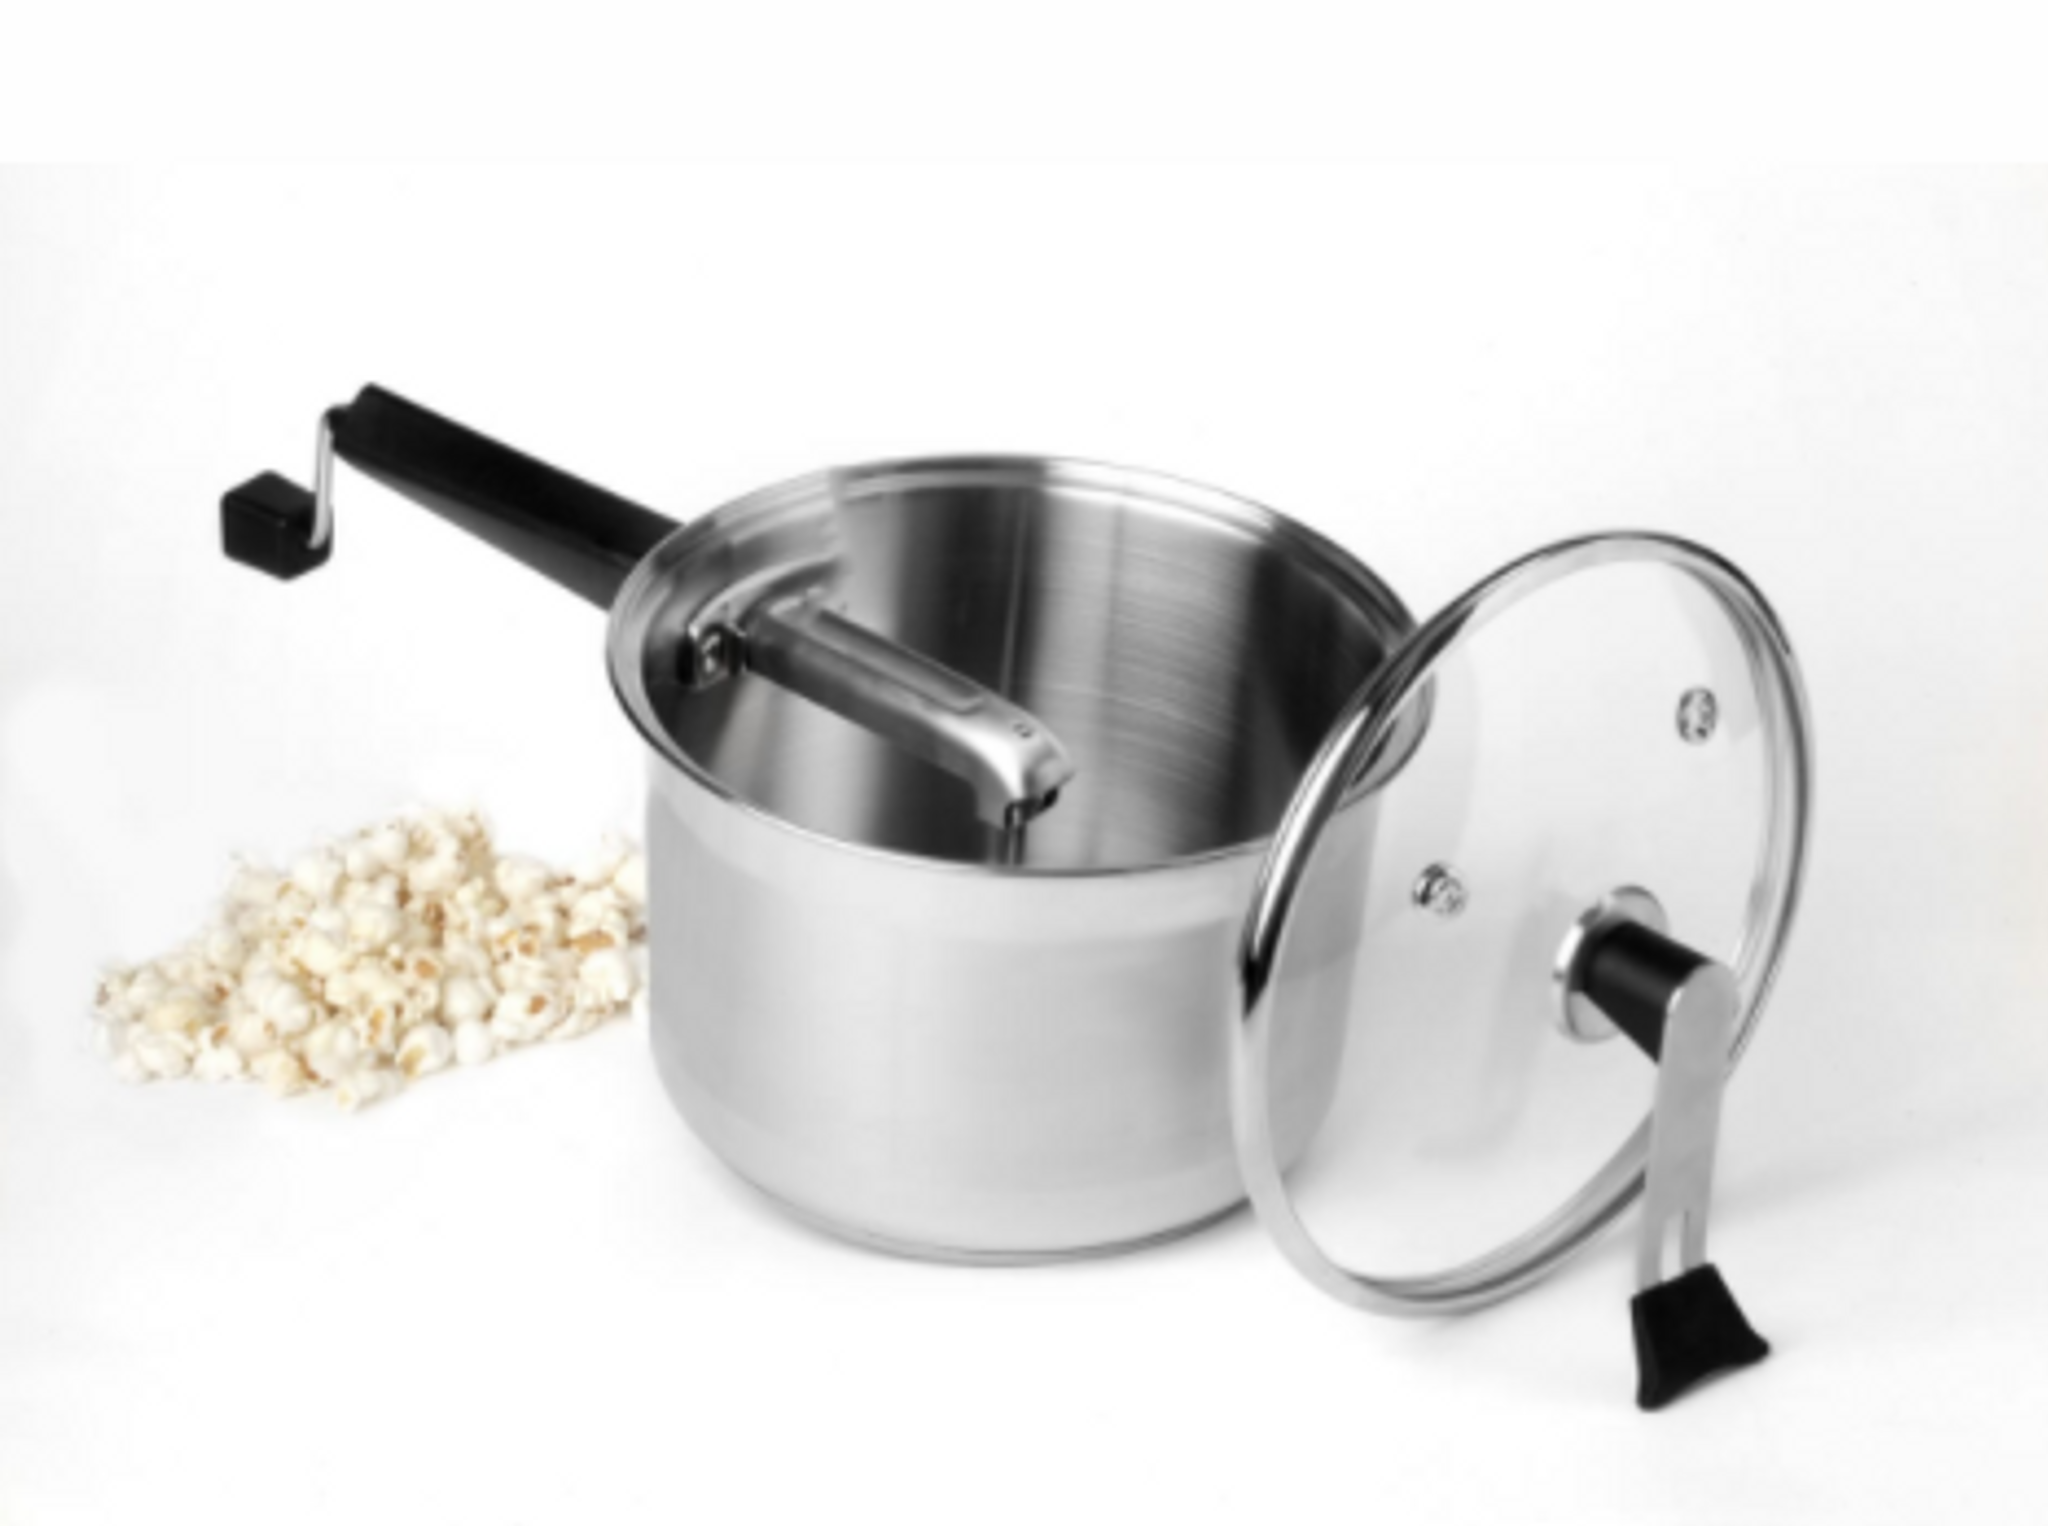 Stainless Steel Platinum Series Popcorn Popper with Glass Lid